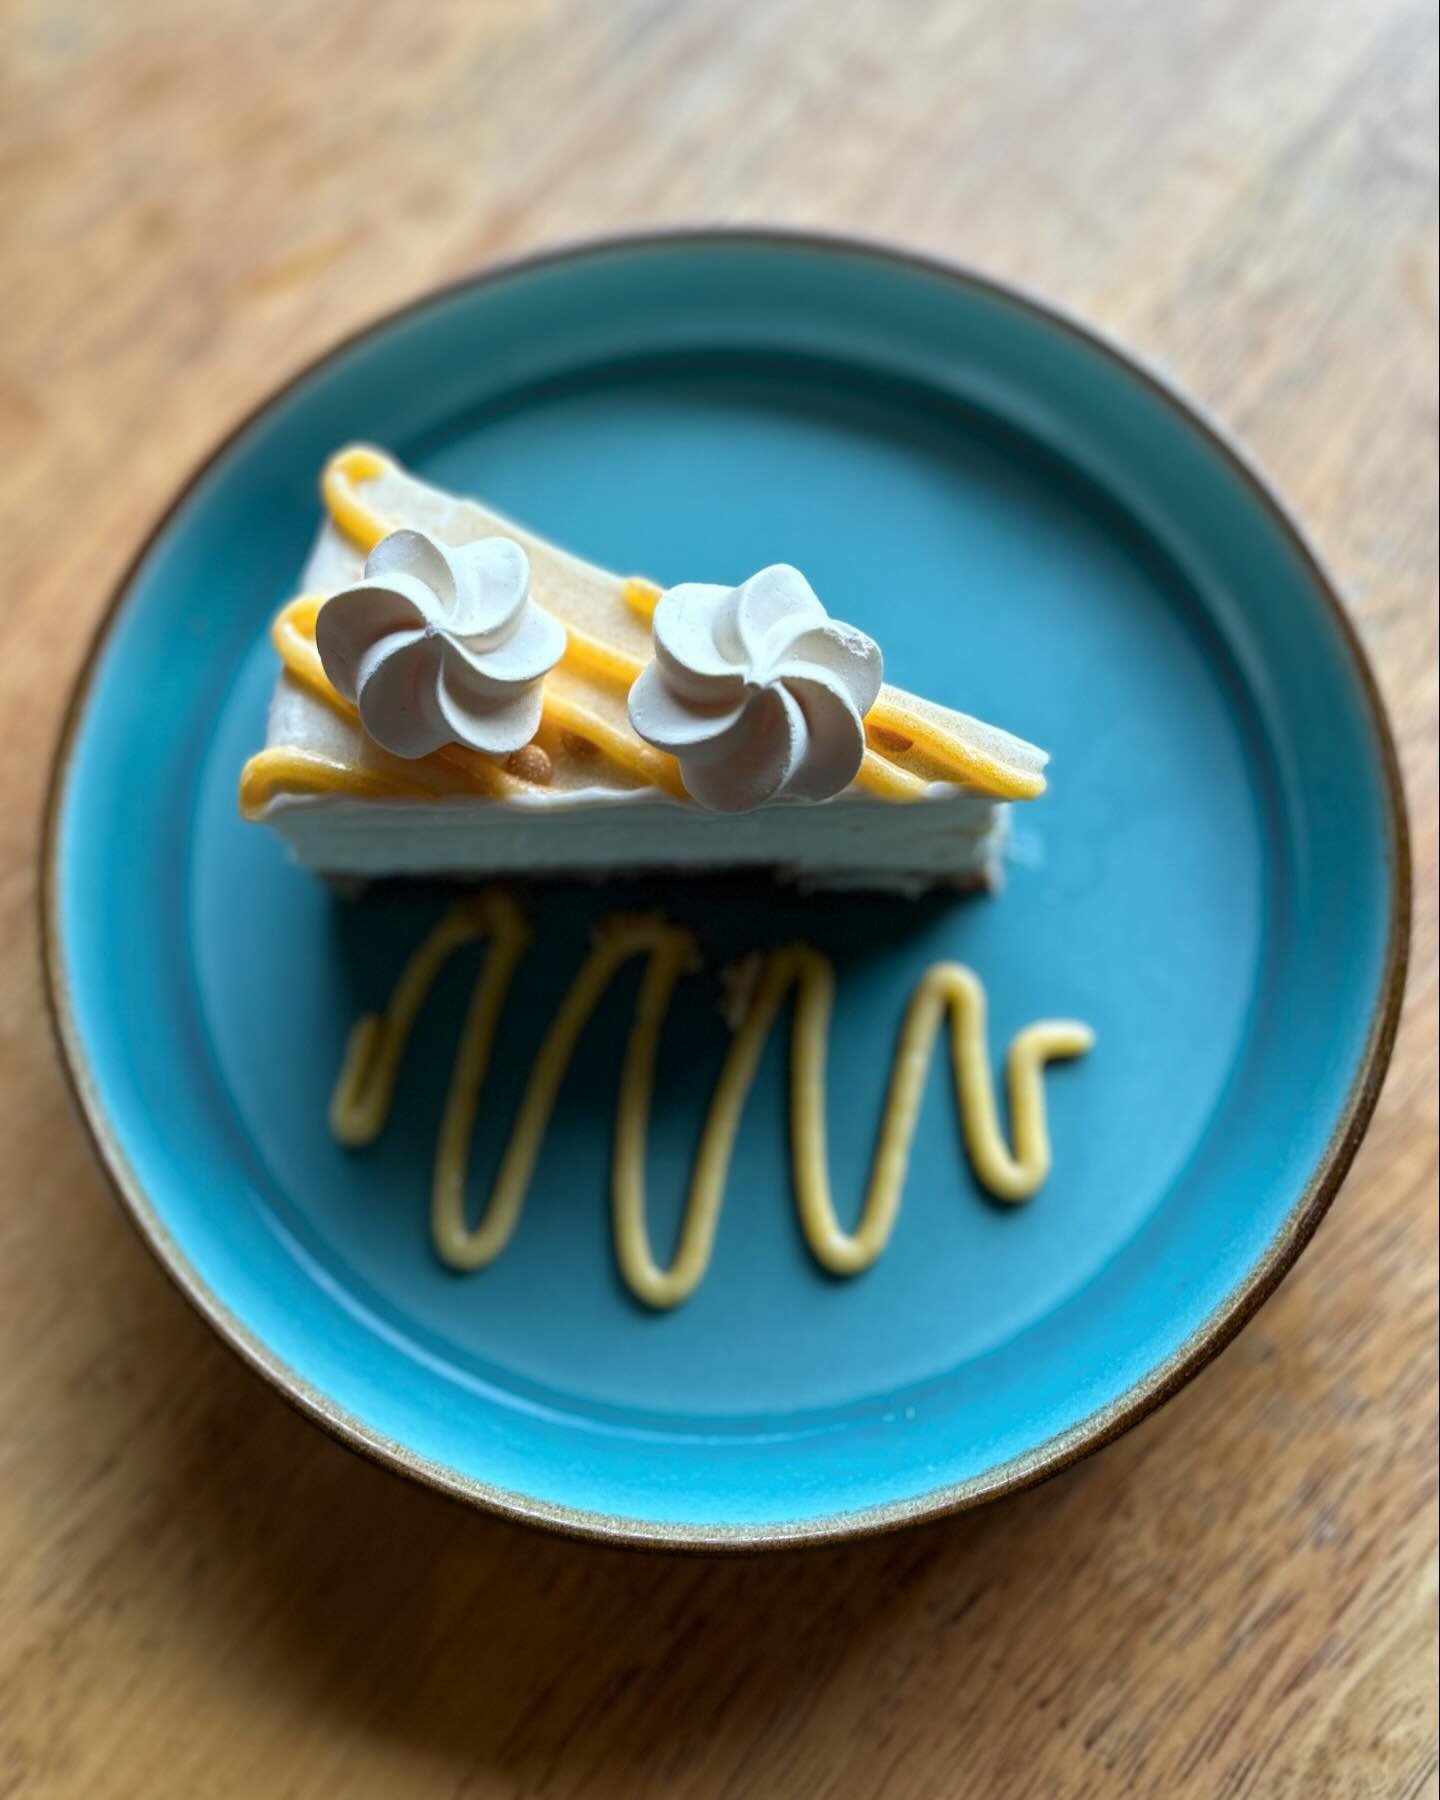 New cheesecake alert 🍰🍋

Chef Jenni has been hard at work making this stunning lemon meringue cheesecake 💛

Bringing the spring feels even if the weather doesn&rsquo;t agree 👀